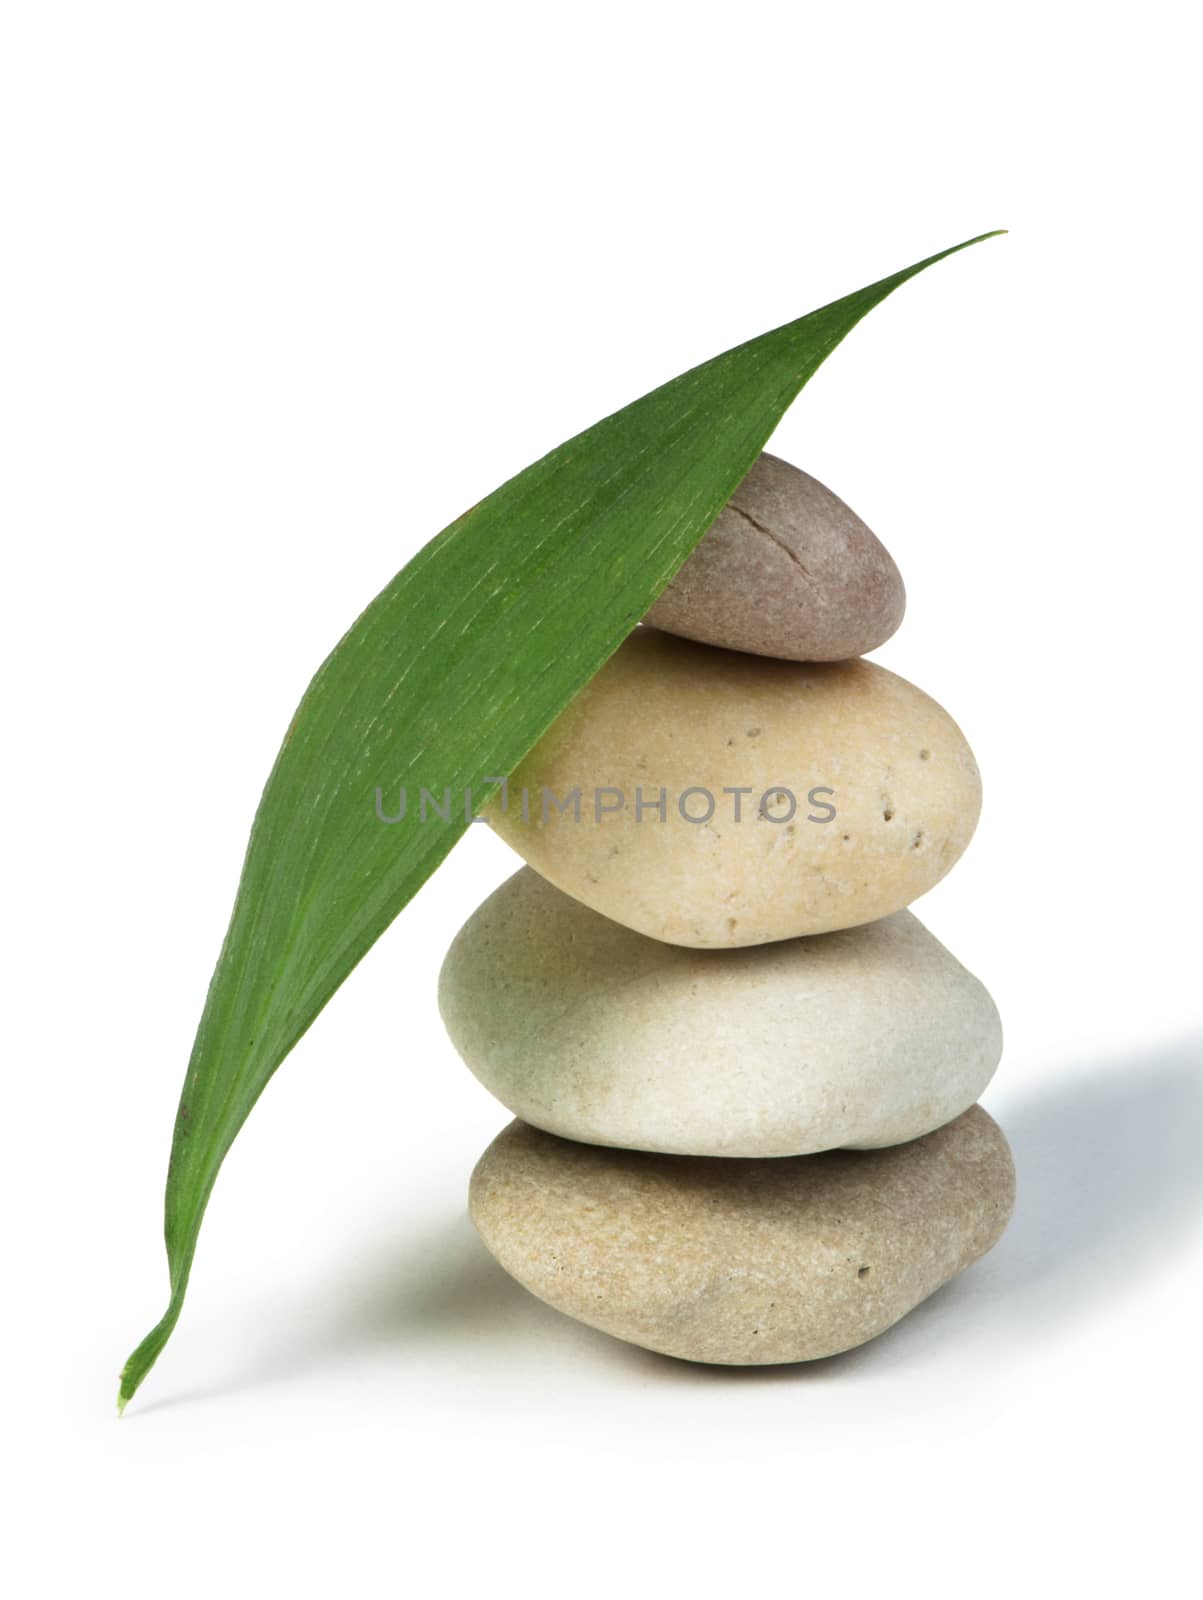 Stacked stones and green leafs on white background